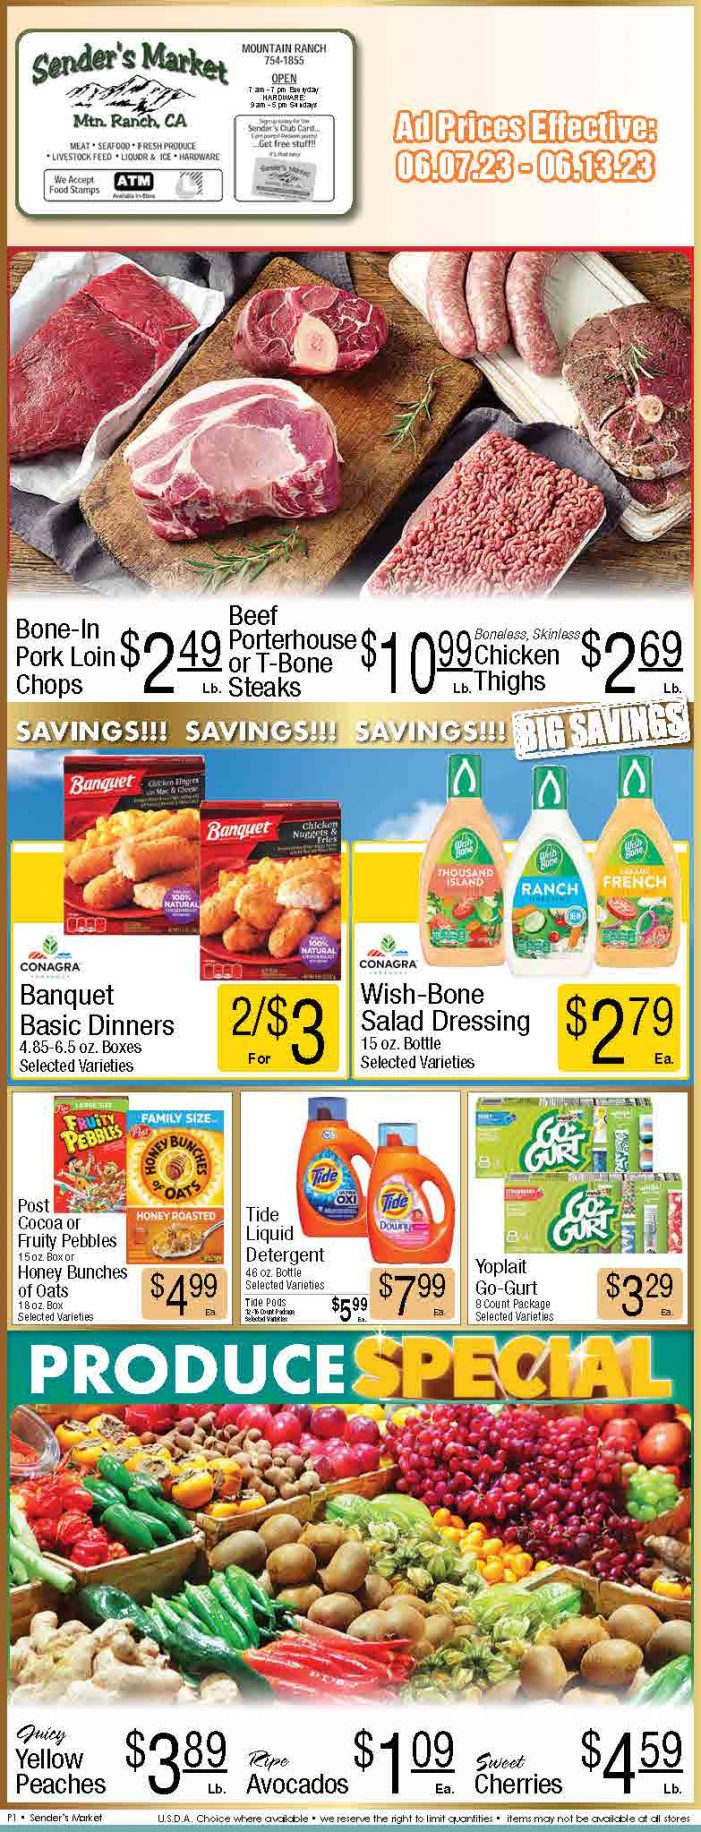 Sender’s Market Weekly Ad & Grocery Specials Through June 13th! Shop Local & Save!!